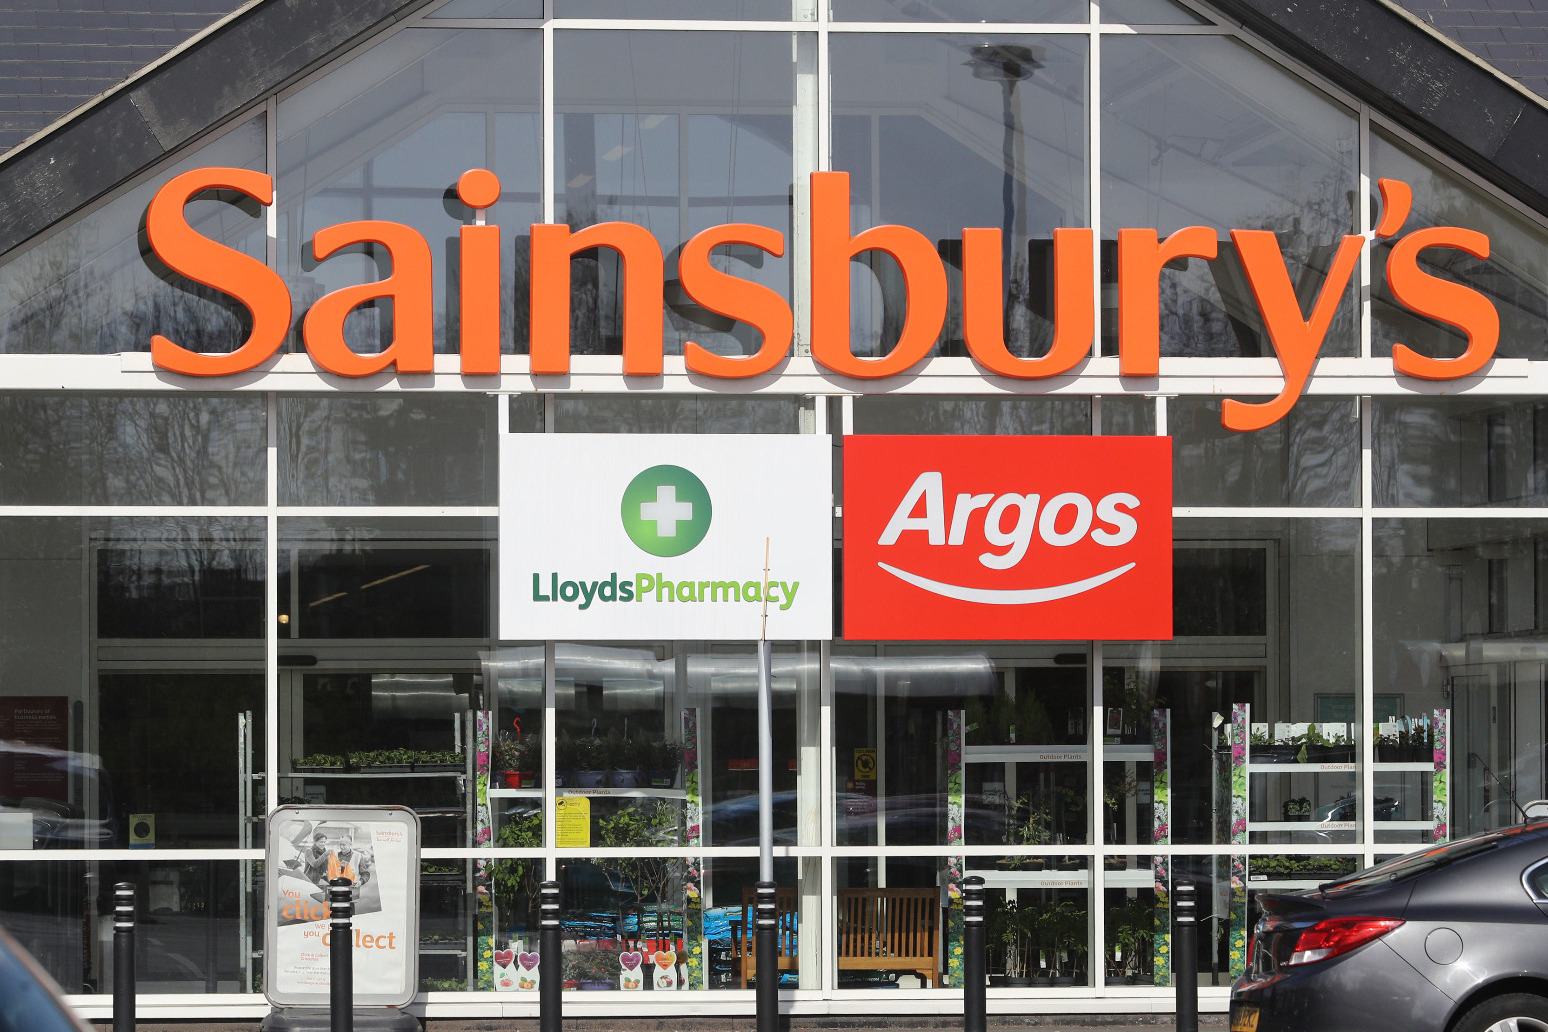 Just Eat to deliver Sainsbury’s orders within 30 minutes 